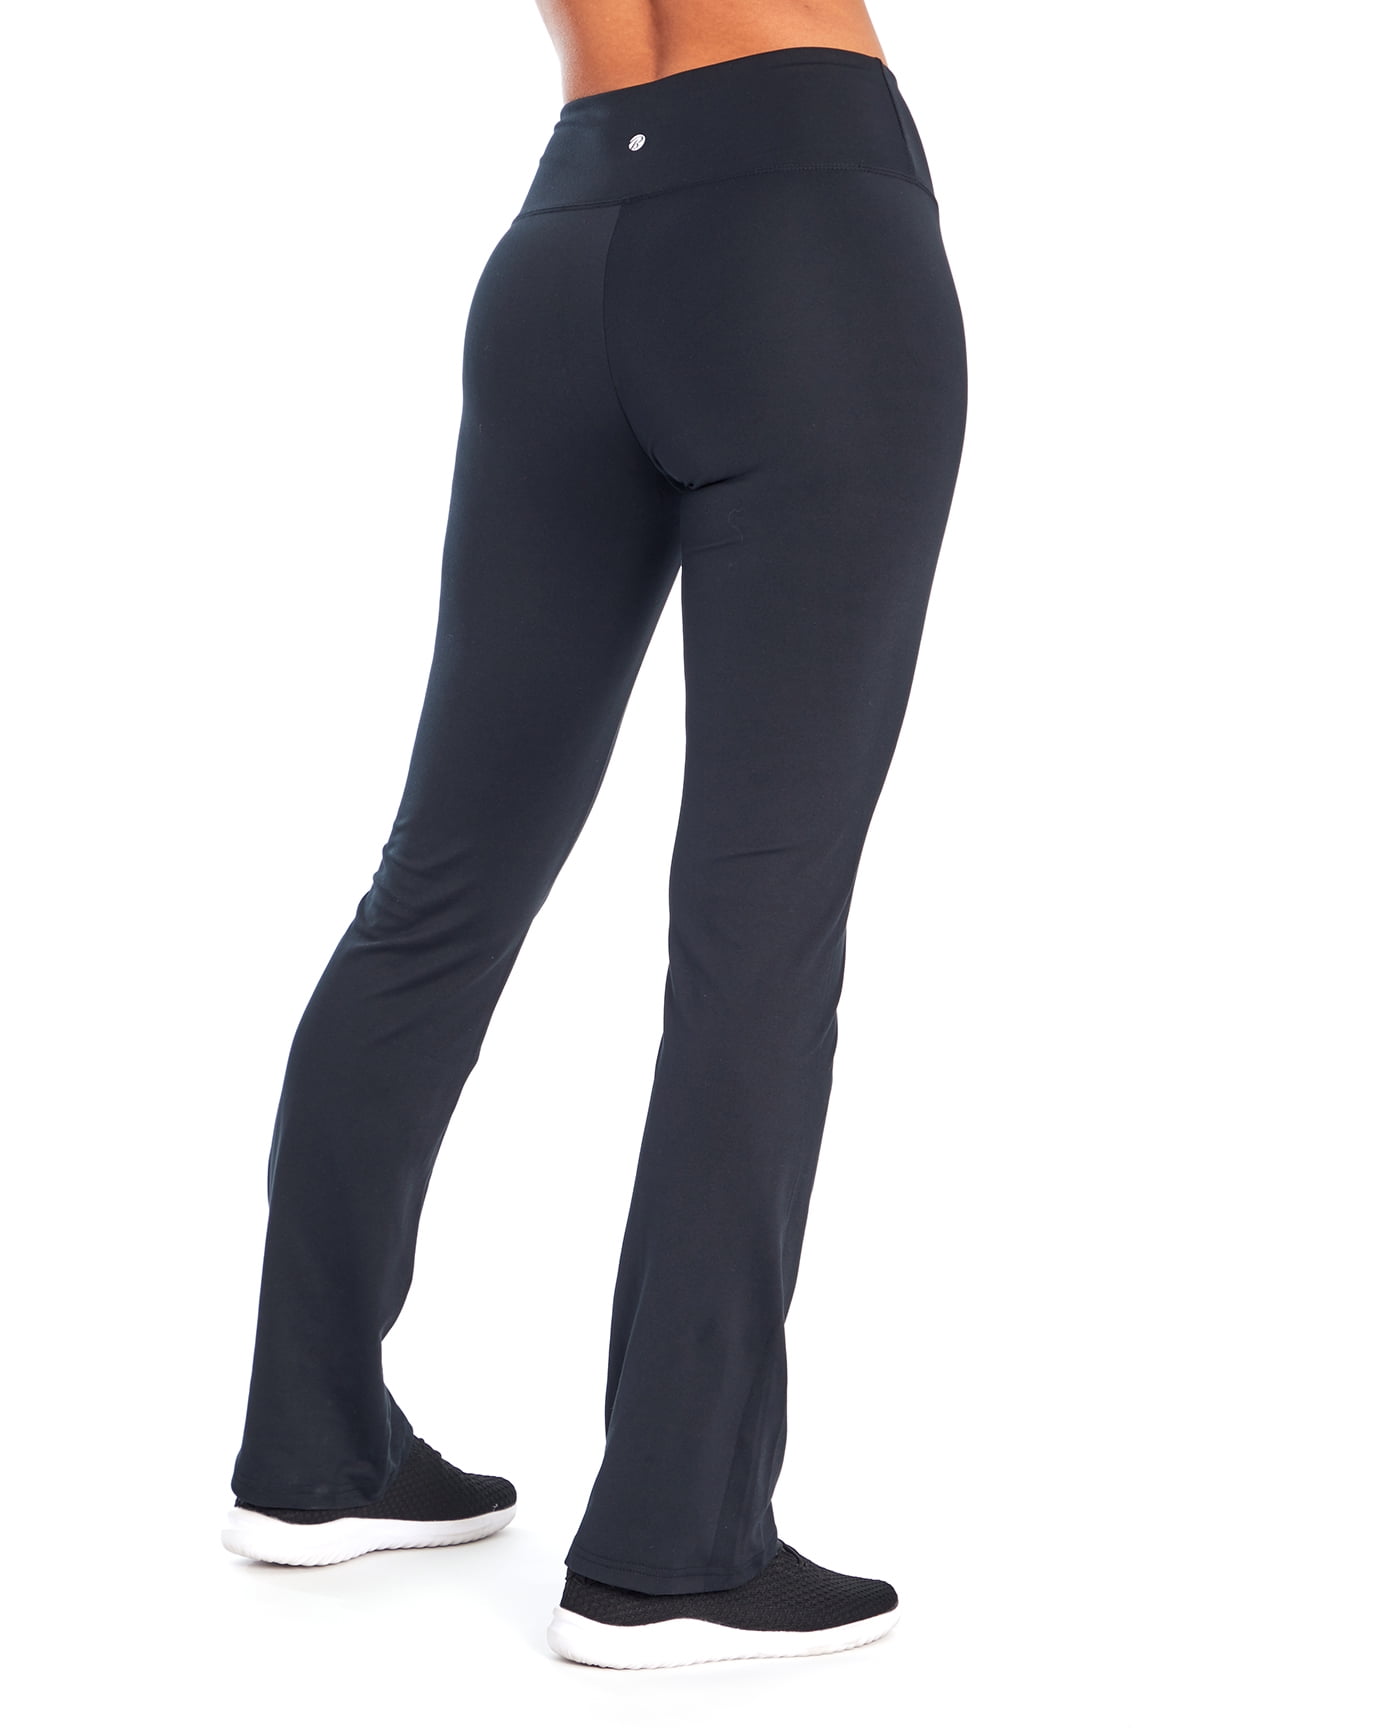 Bally Total Fitness Active Core High Rise Capri Leggings | Walmart's Workout  Clothes Are Next-Level Cute and Seriously Affordable | POPSUGAR Fitness UK  Photo 8